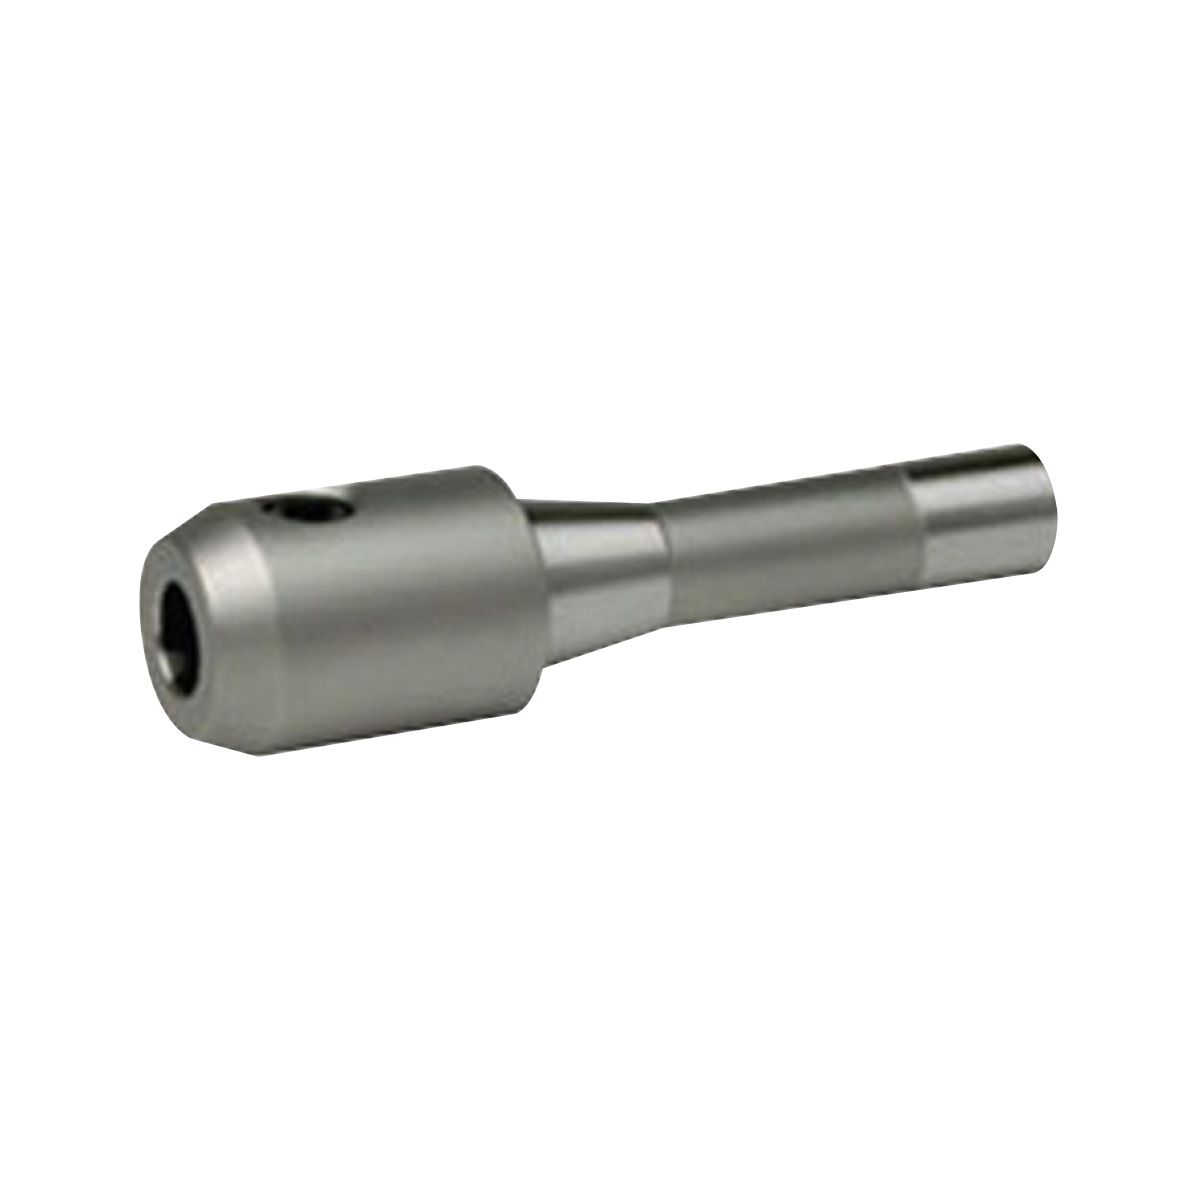 1/4" R8 END MILL HOLDER-PRO SERIES  (3901-0102)